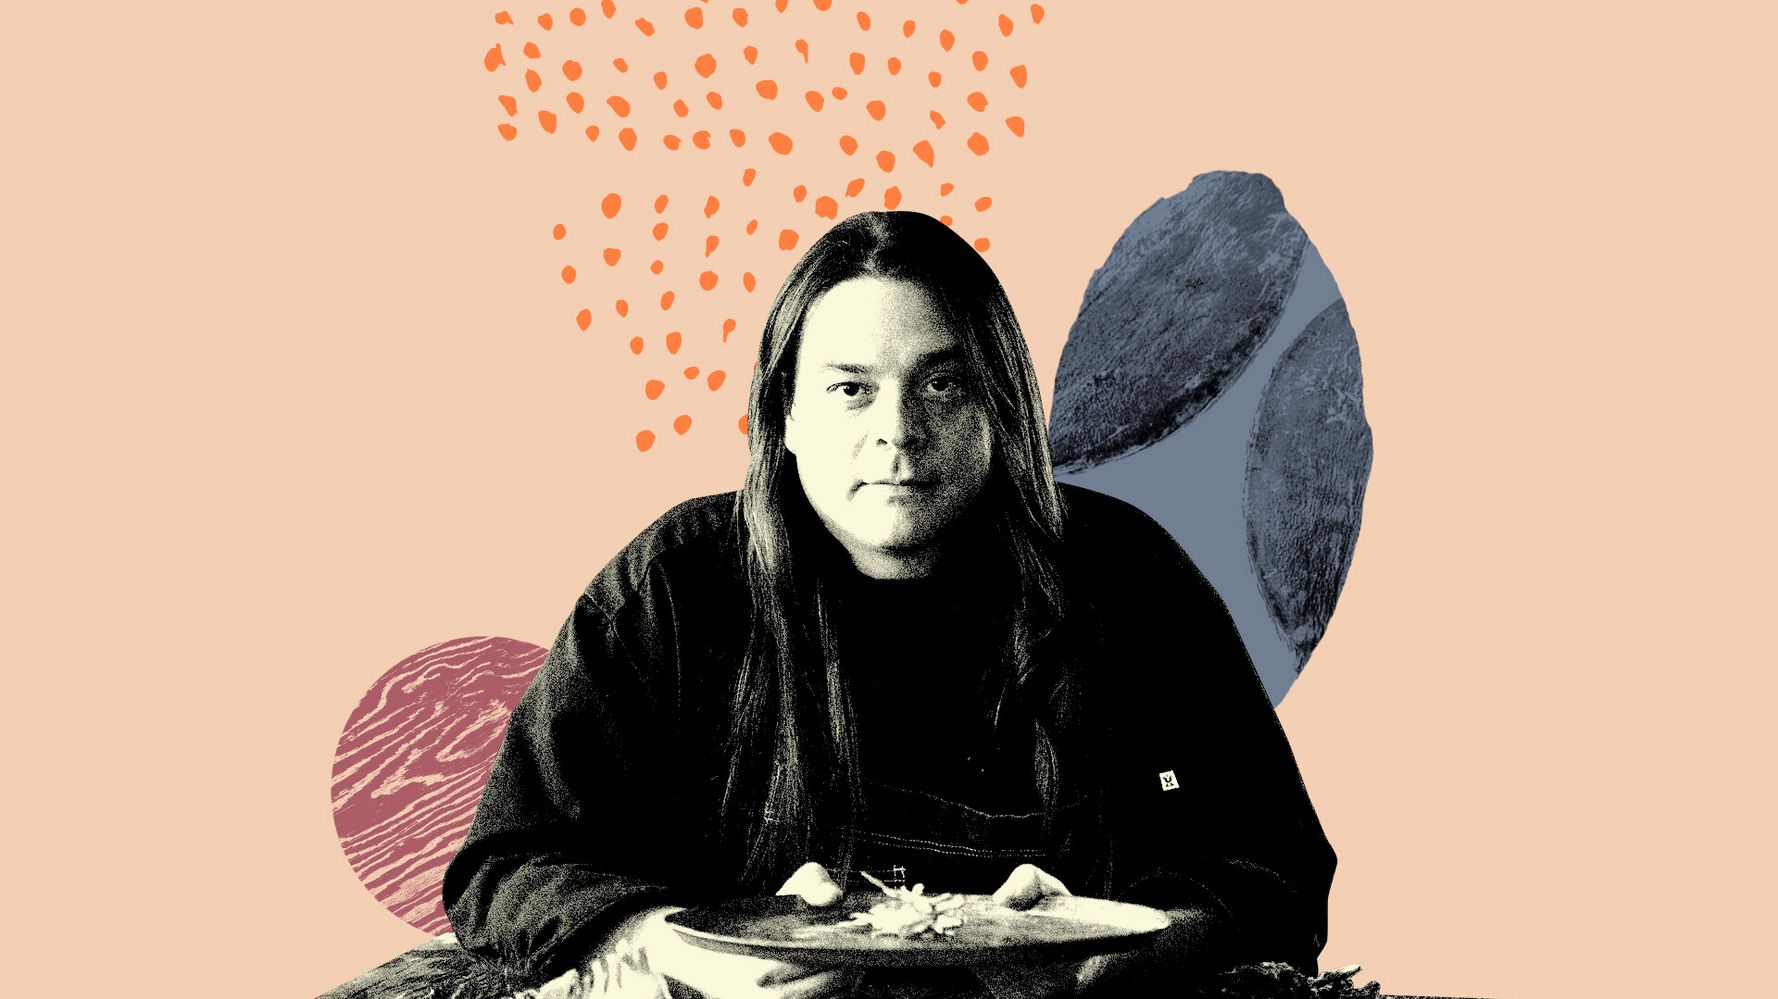 Sean Sherman, The Sioux Chef: ‘This Is The Year To Rethink Thanksgiving’